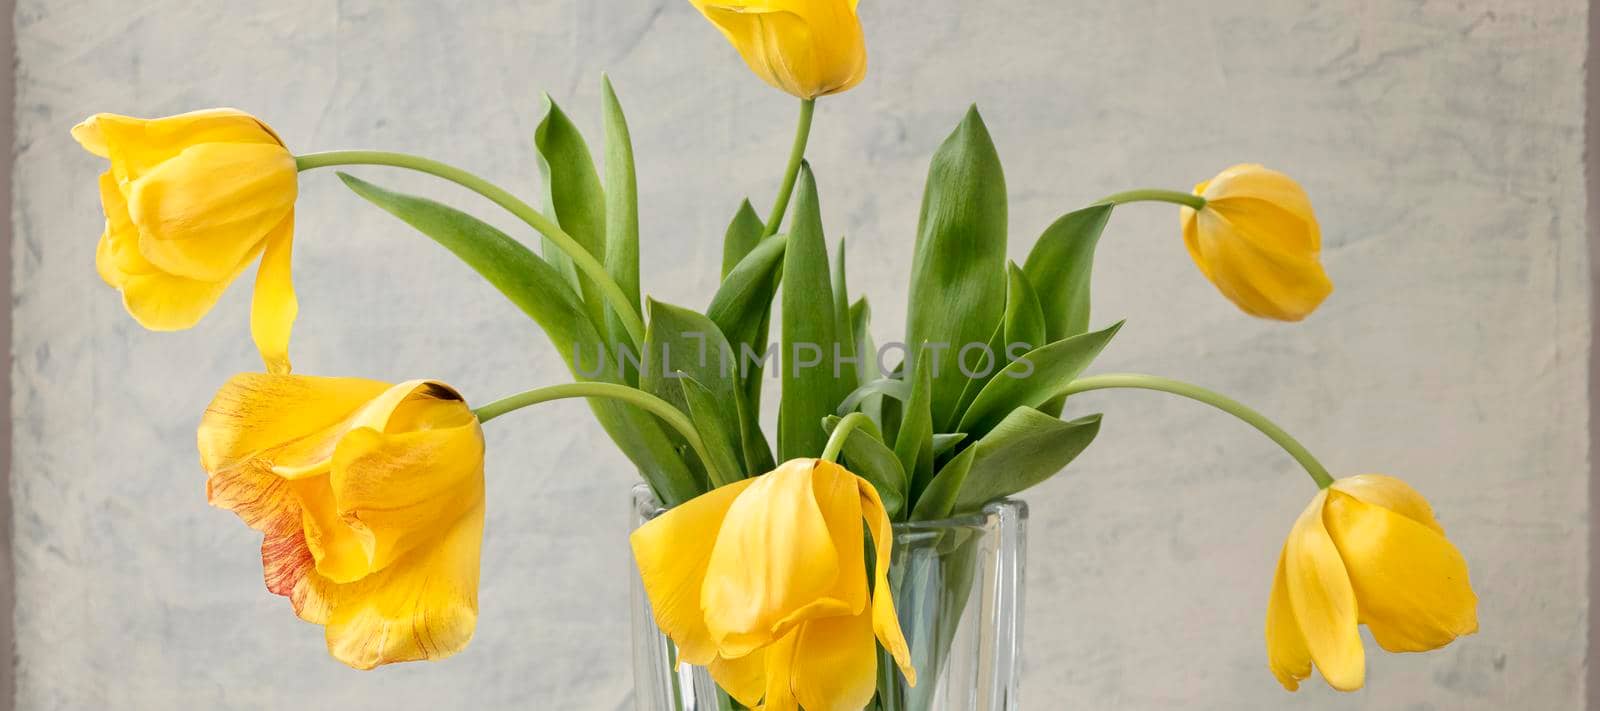 banner with bouquet of yellow tulips on gray textured background. Fading yellow tulips on a gray background in a transparent vase.